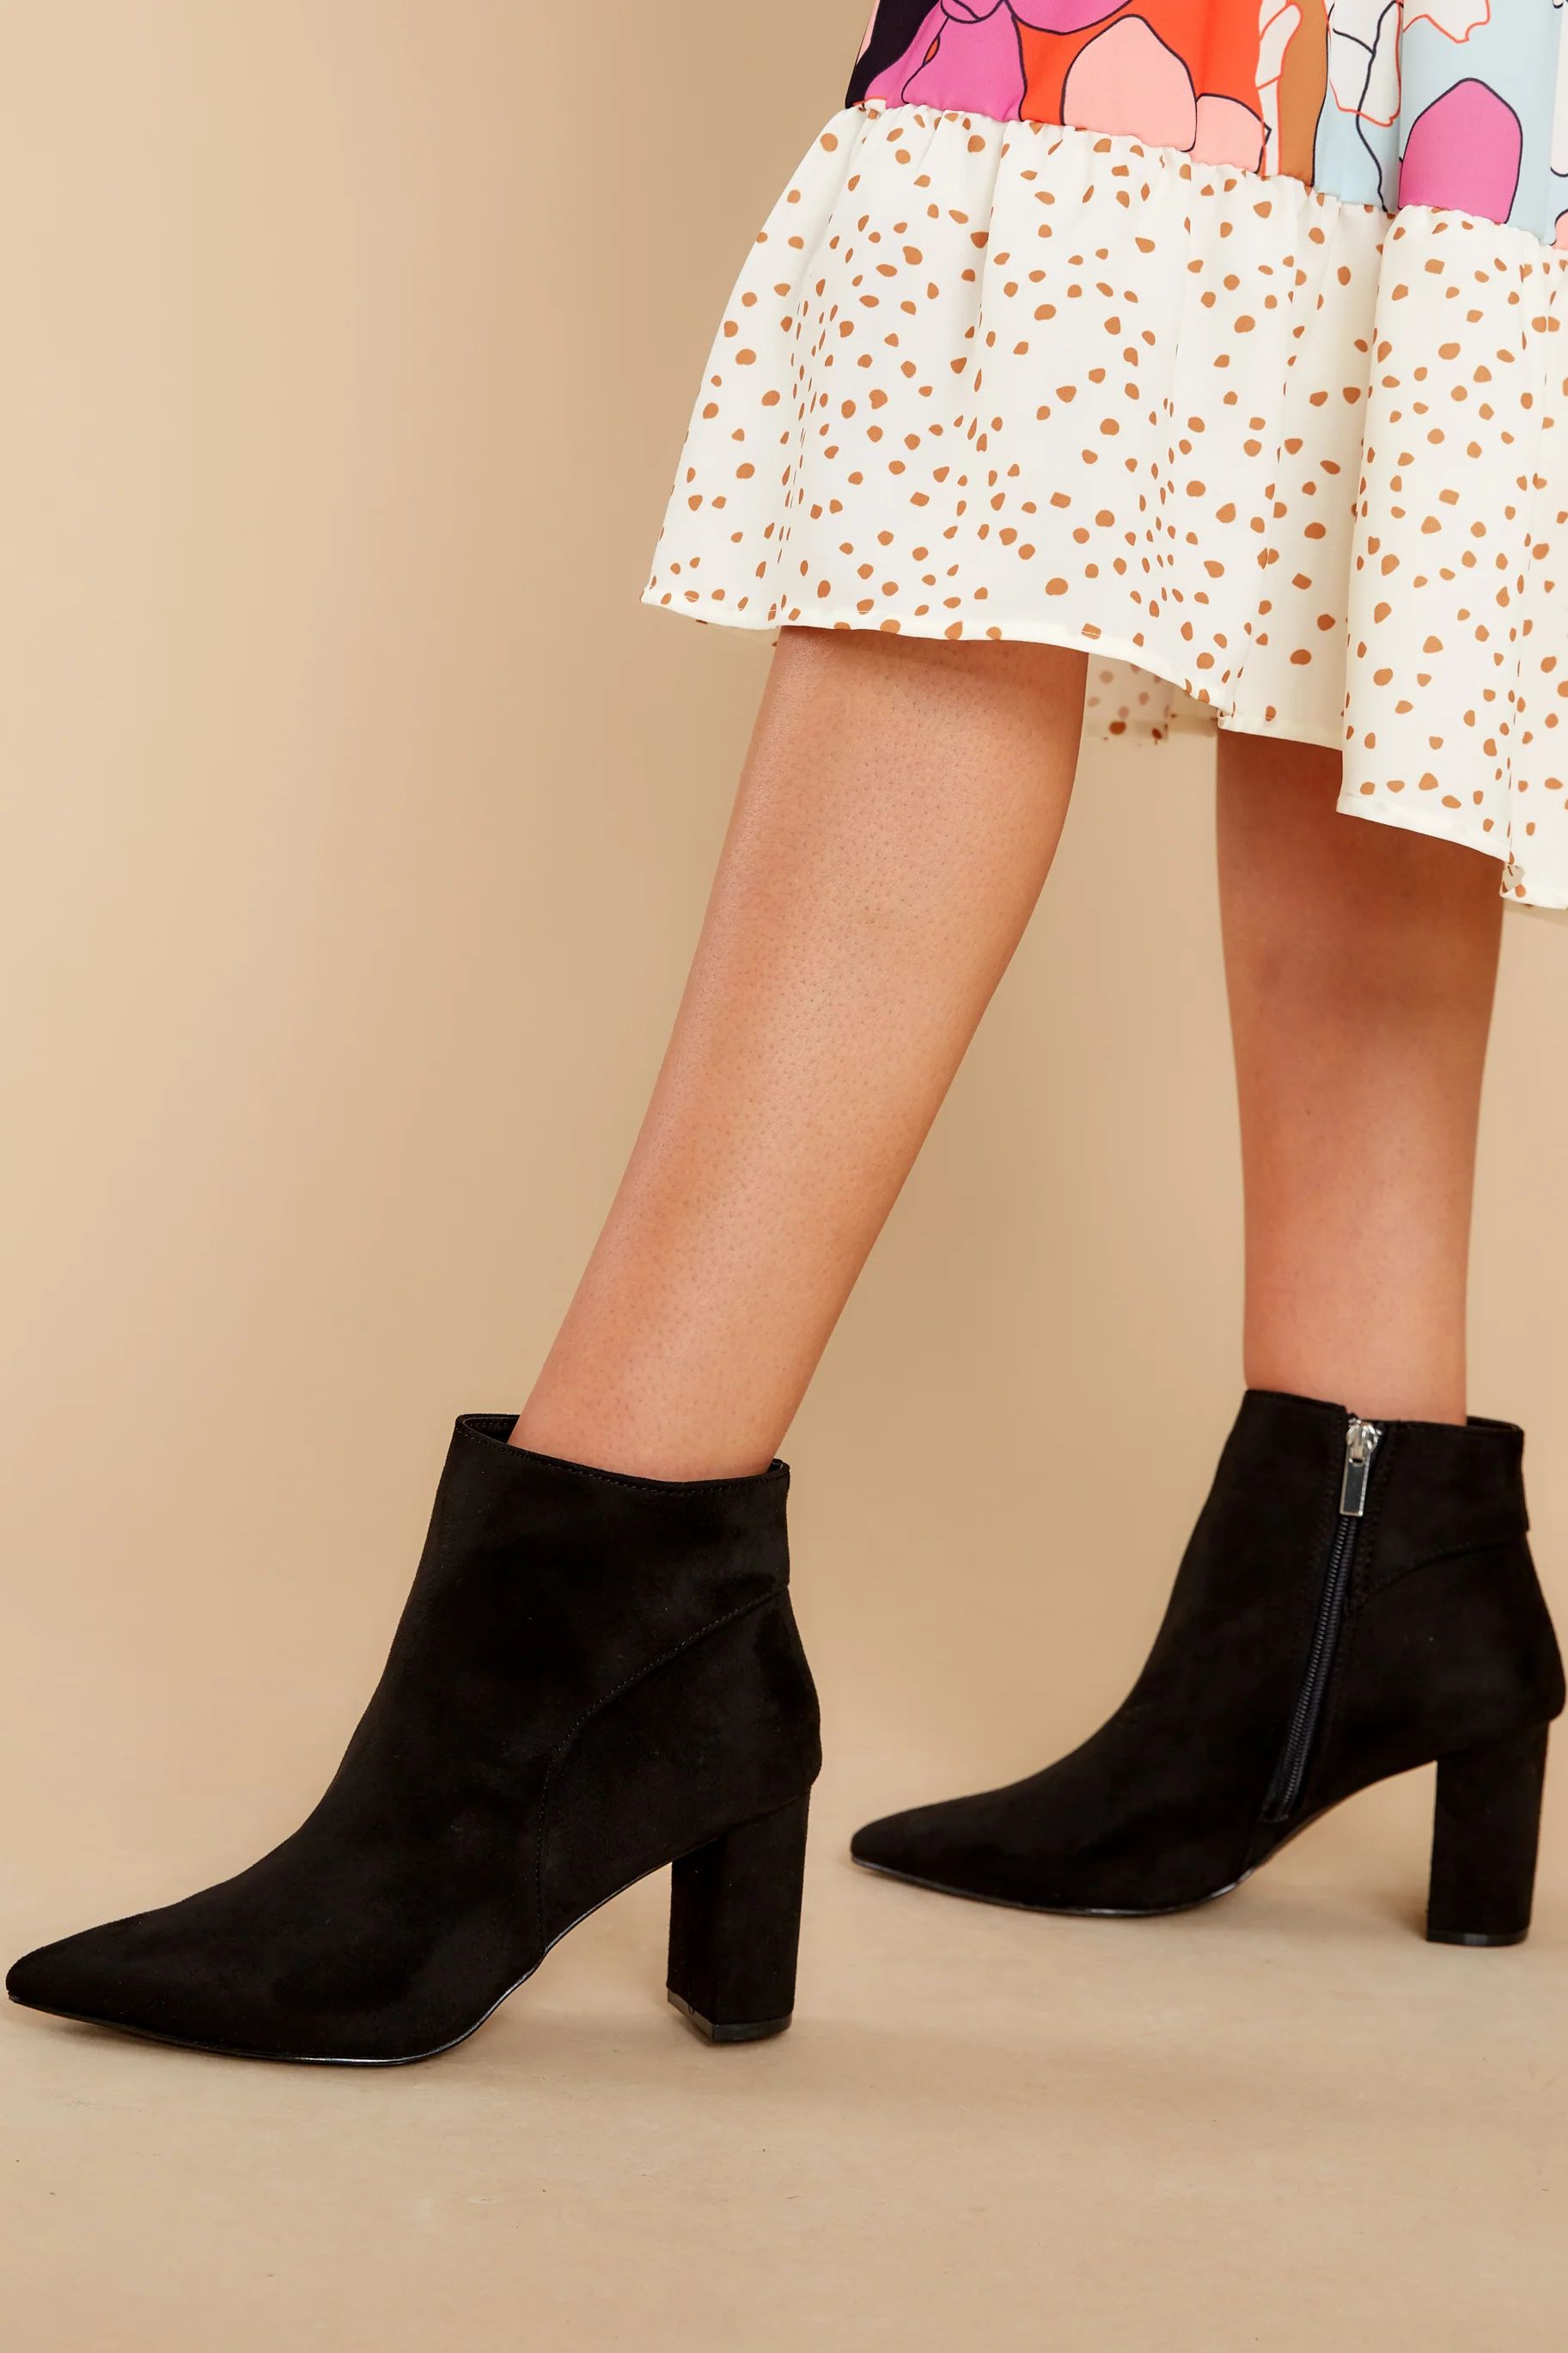 Make It Here Black Ankle Booties | Red Dress 